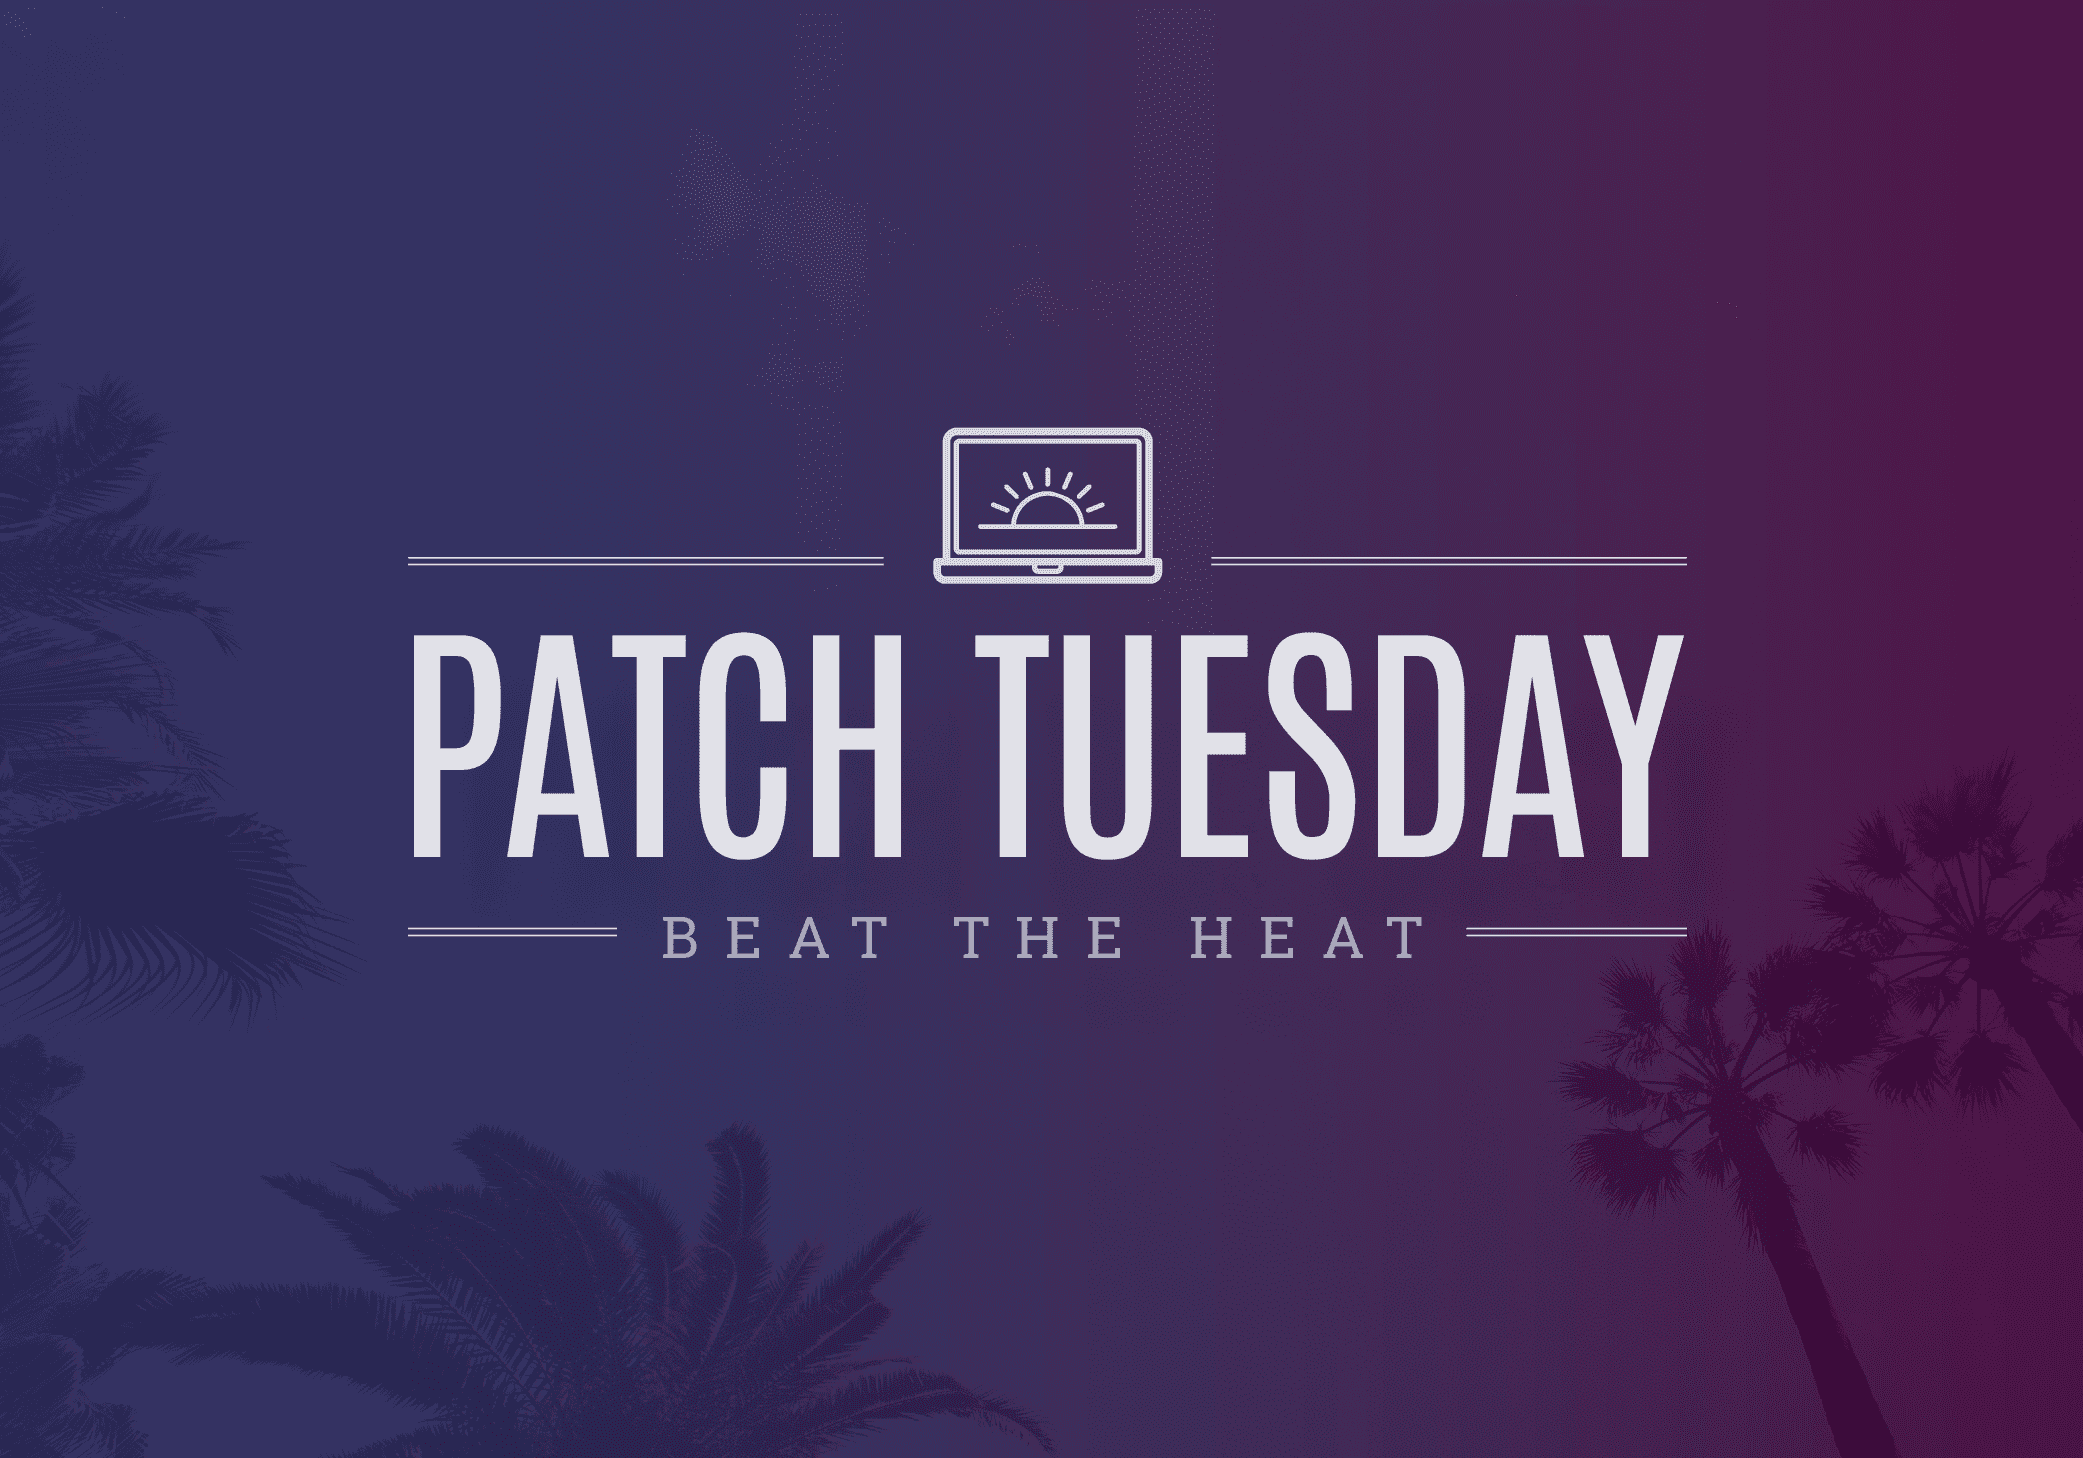 June Patch Tuesday: Beat the Heat